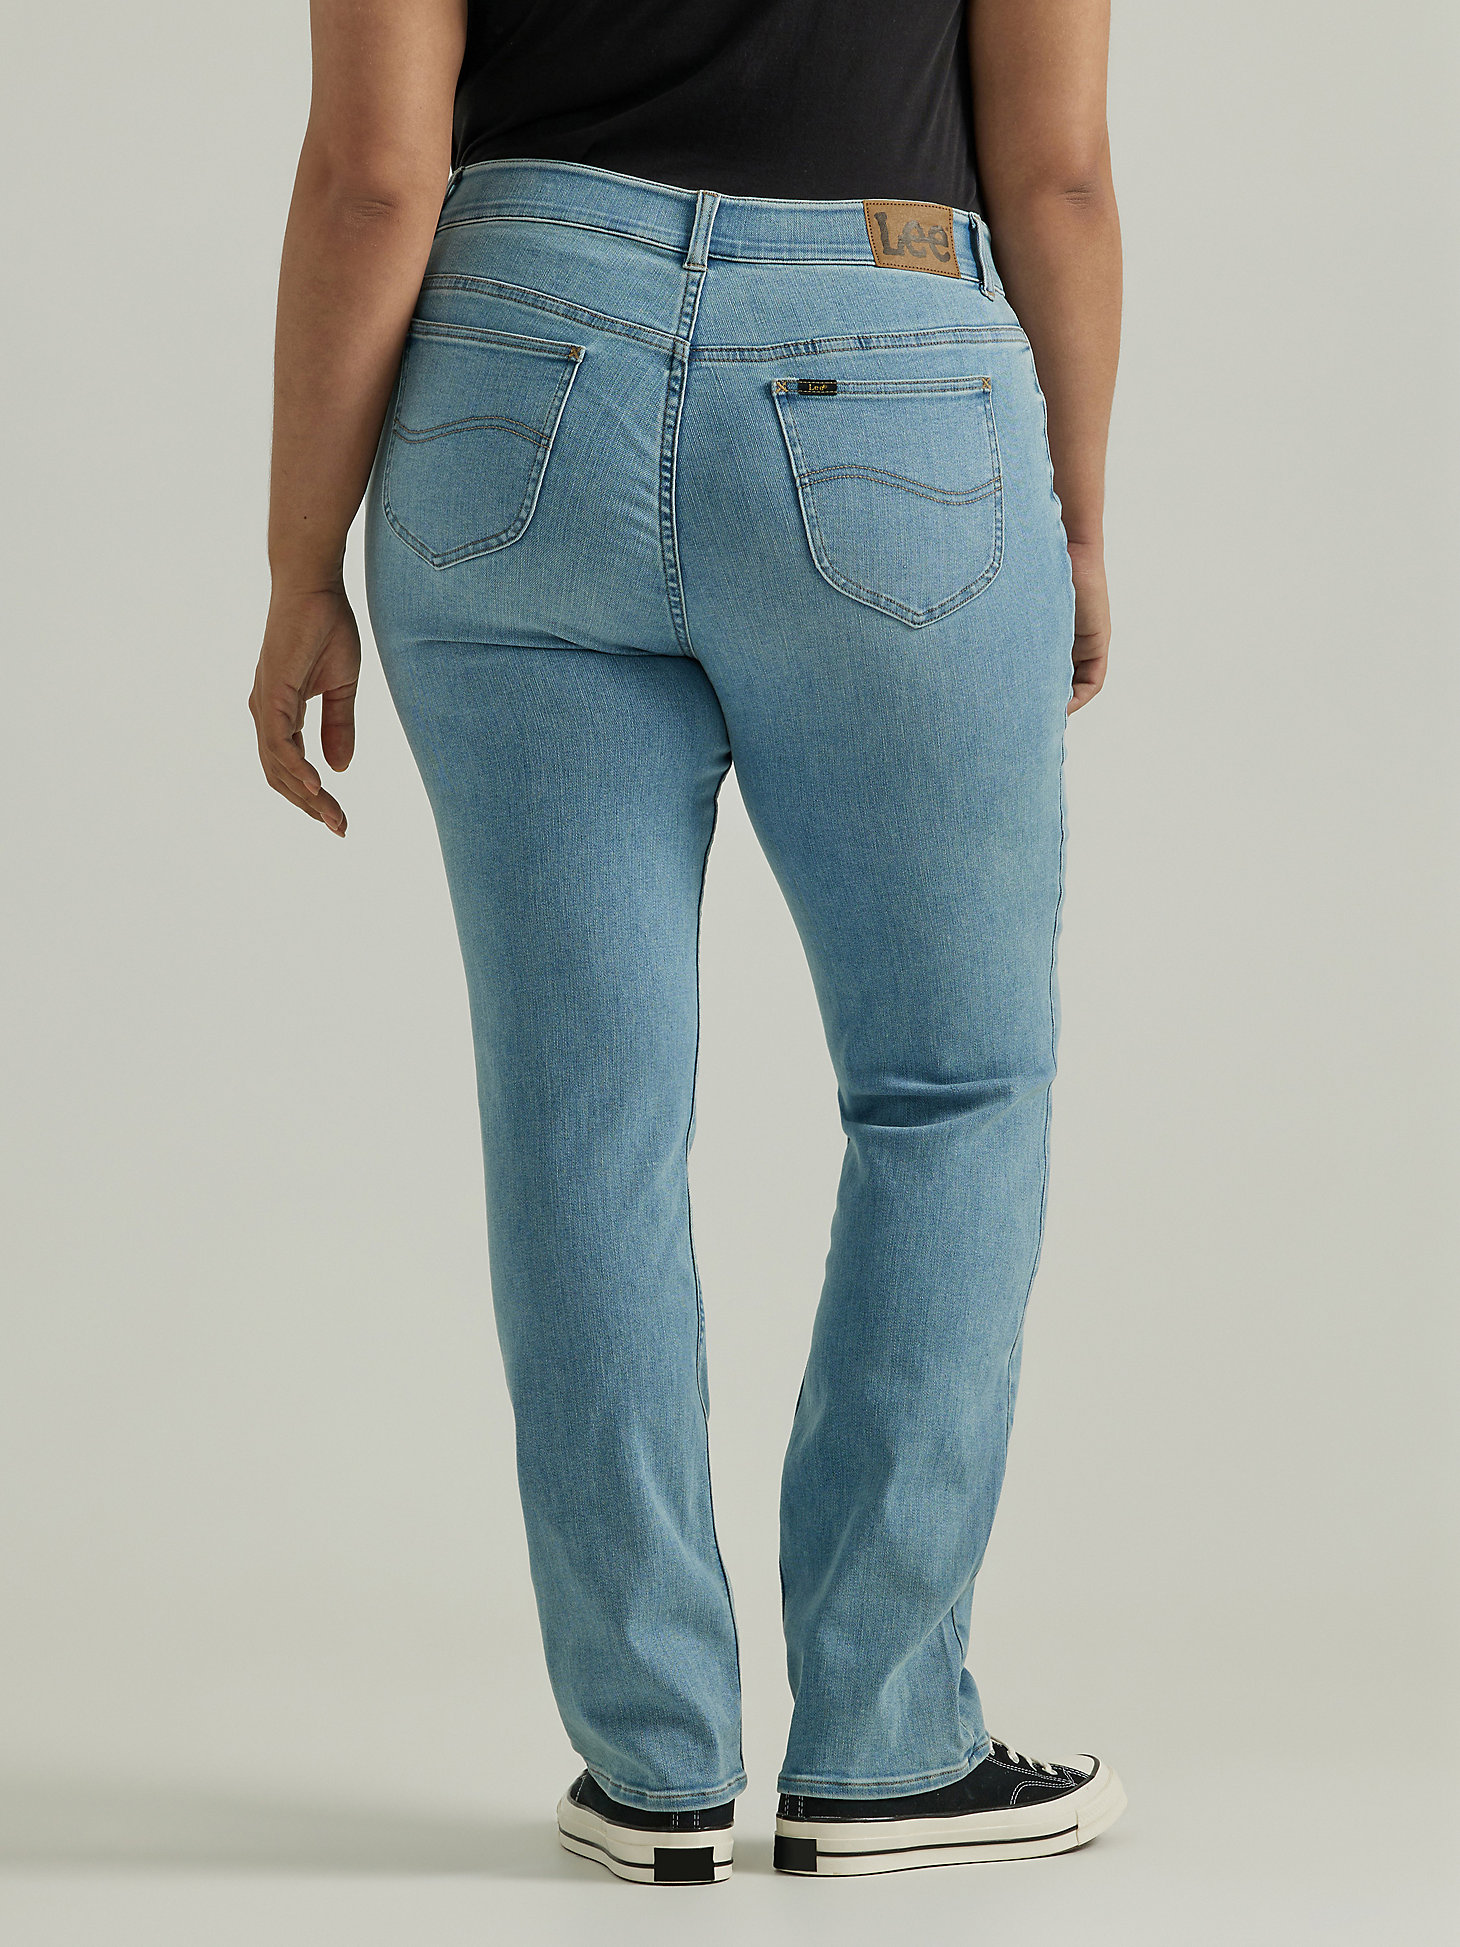 Women's Ultra Lux Comfort with Flex Motion Straight Jean (Plus) in Within Motion alternative view 2